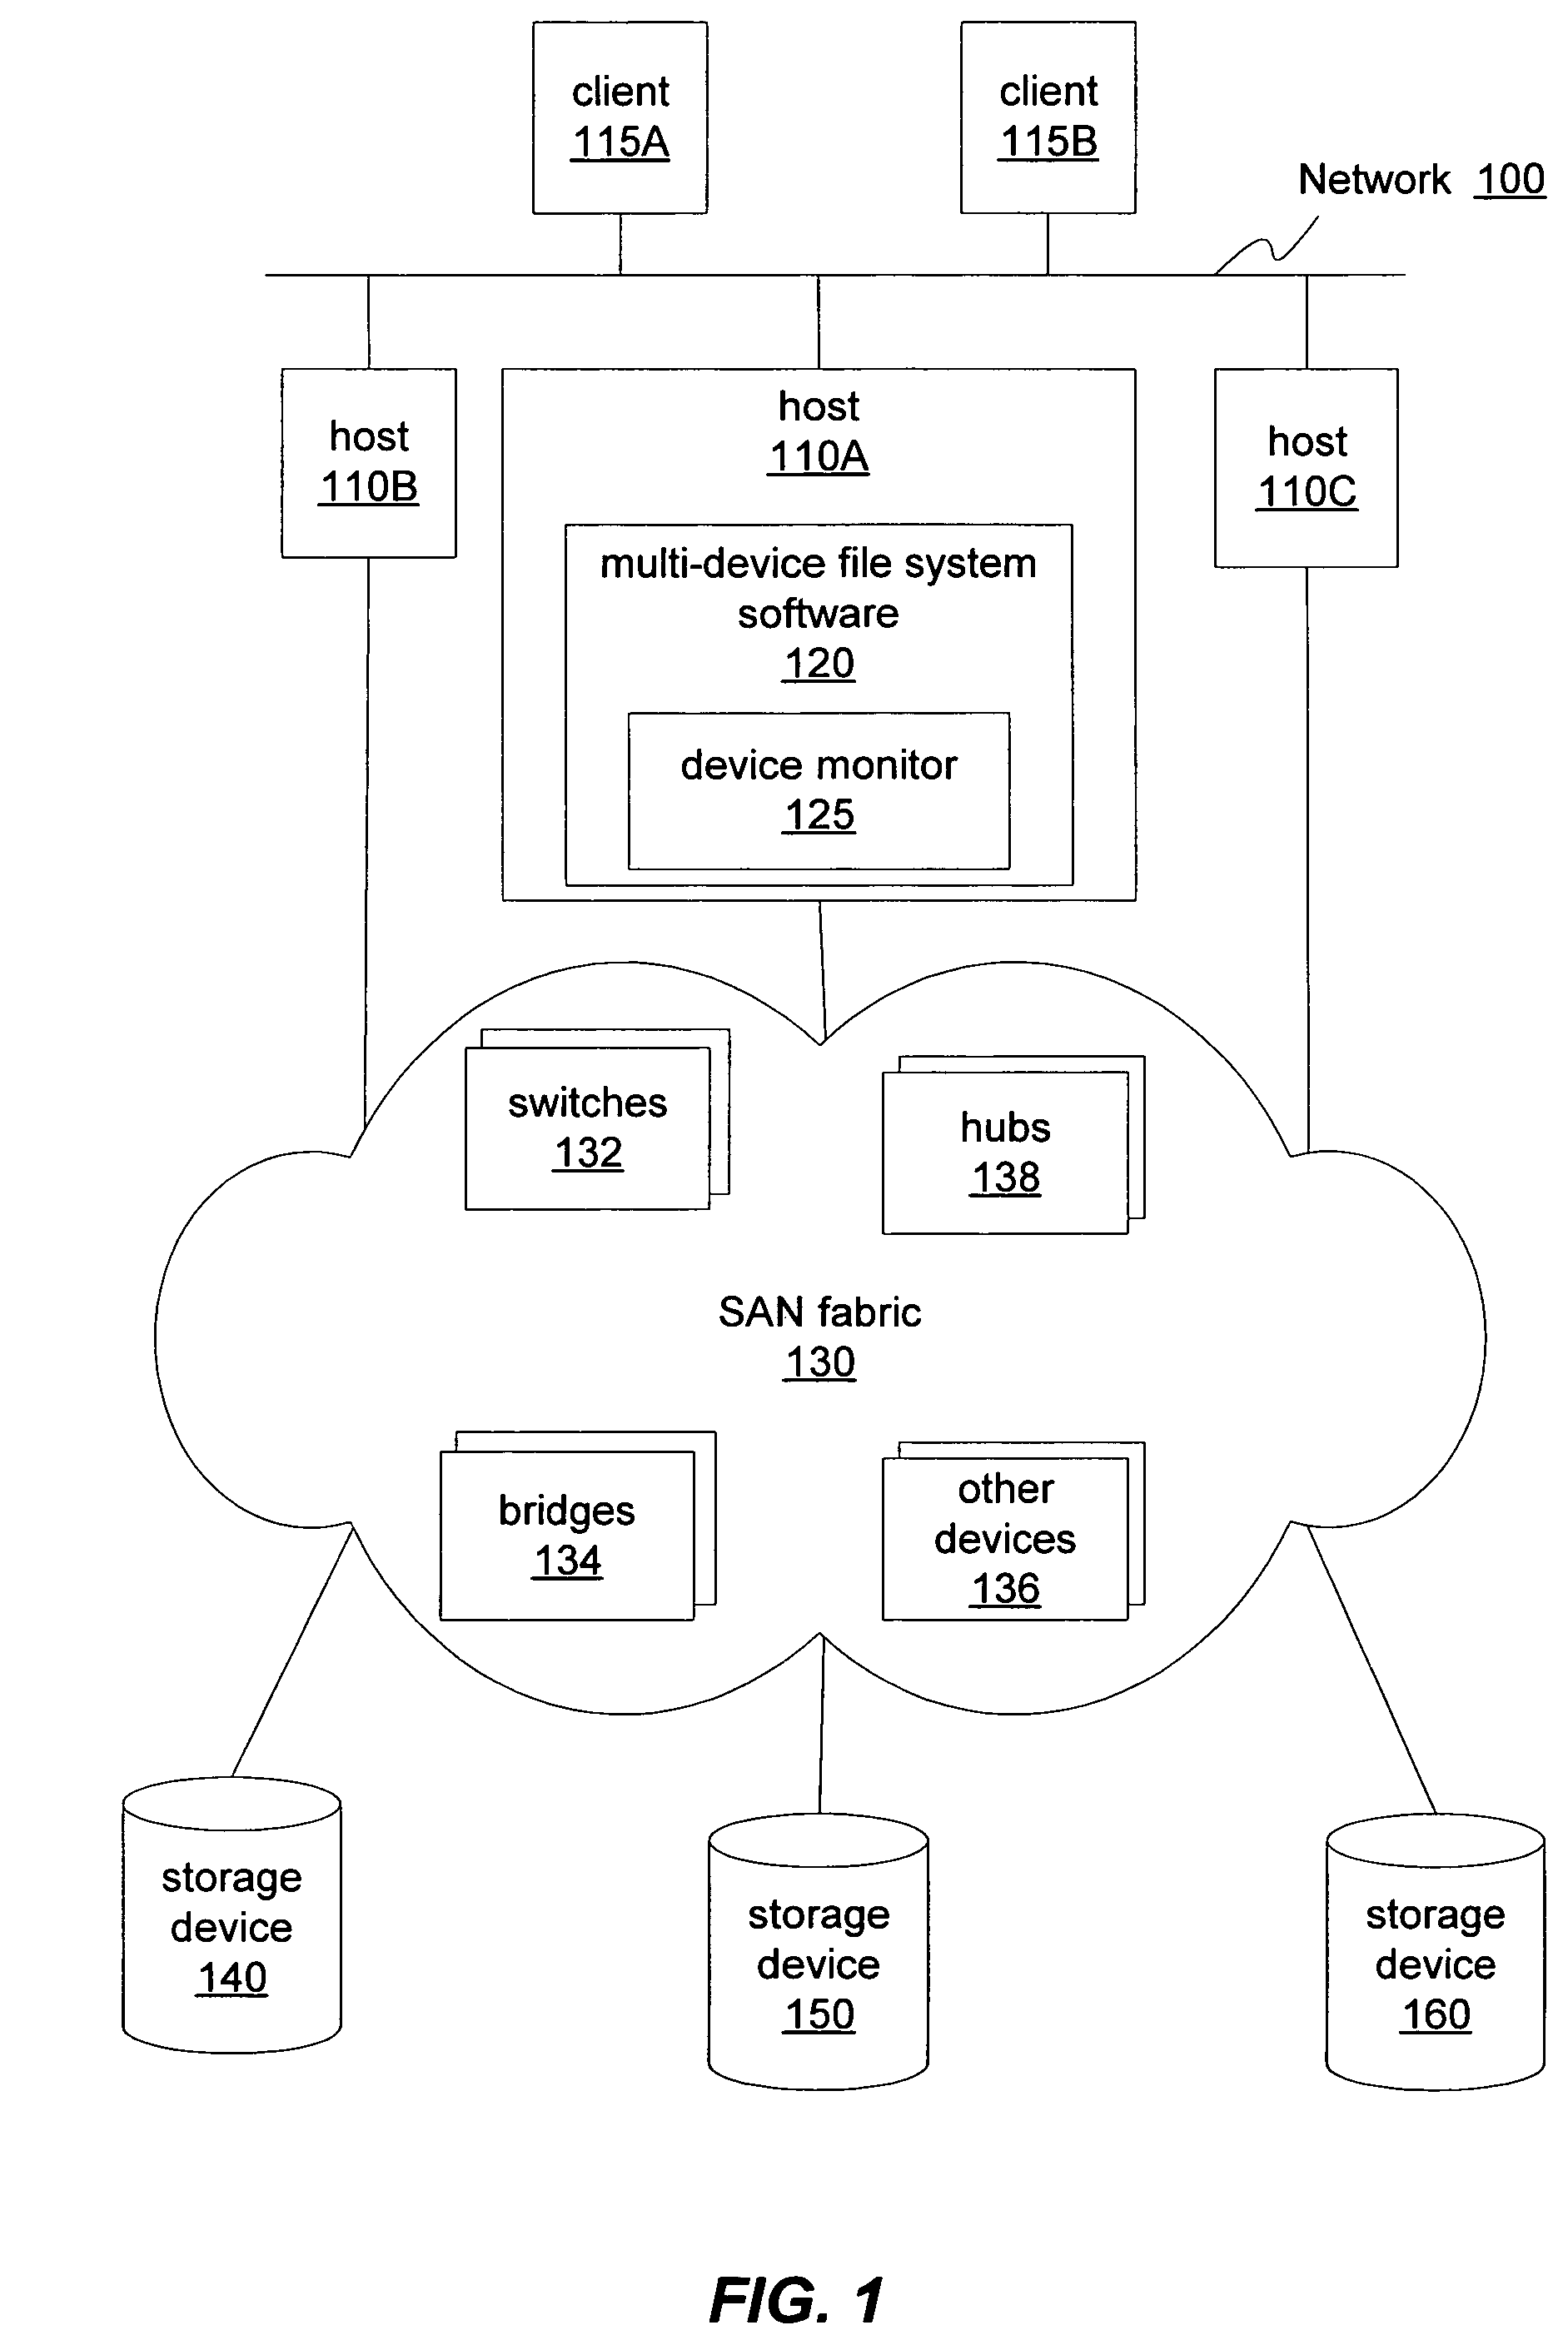 Performance-adjusted data allocation in a multi-device file system